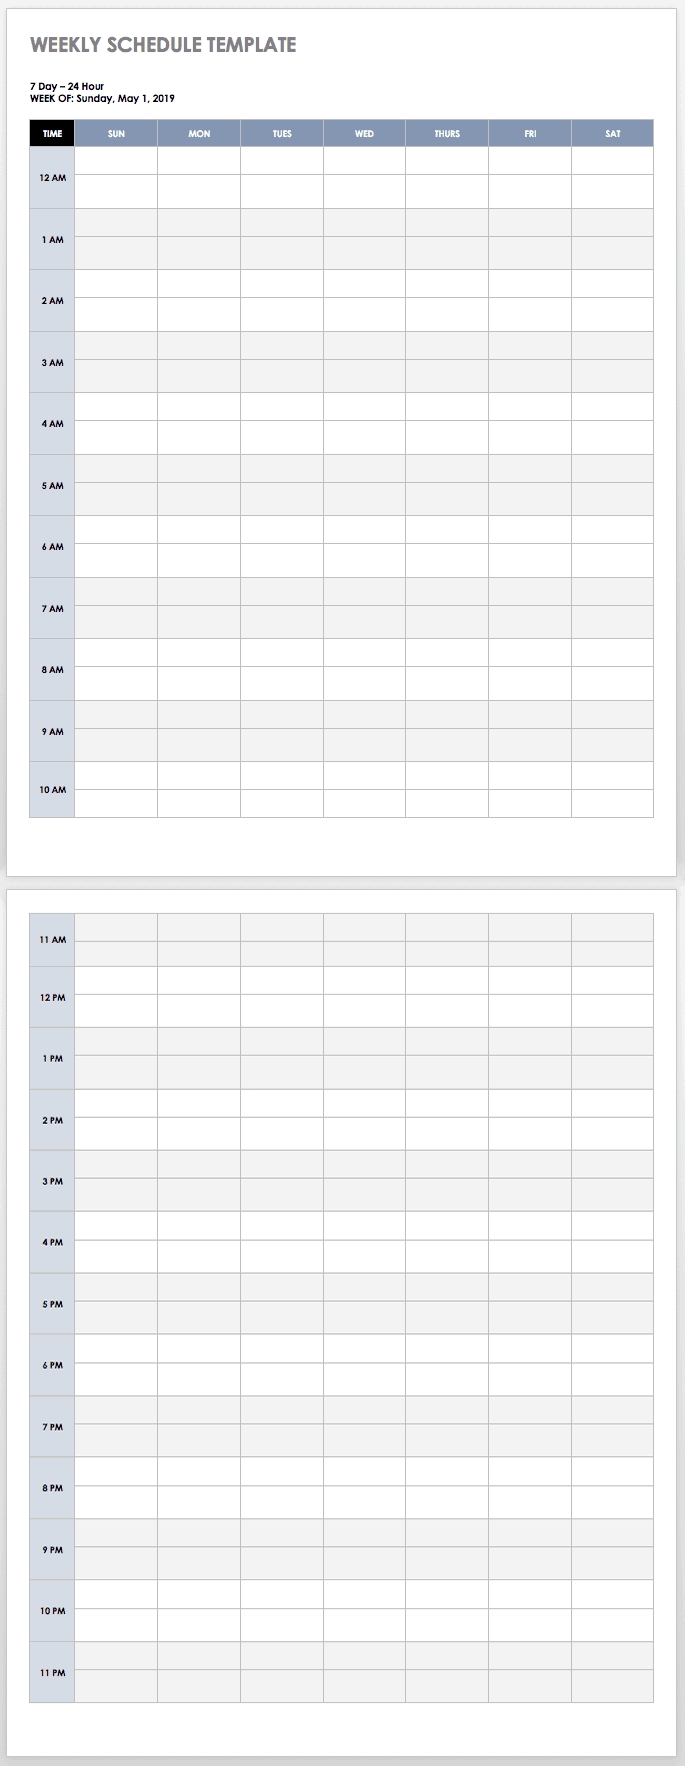 28 Free Time Management Worksheets | Smartsheet Blank Schedule Template 7 Day 24 Hours